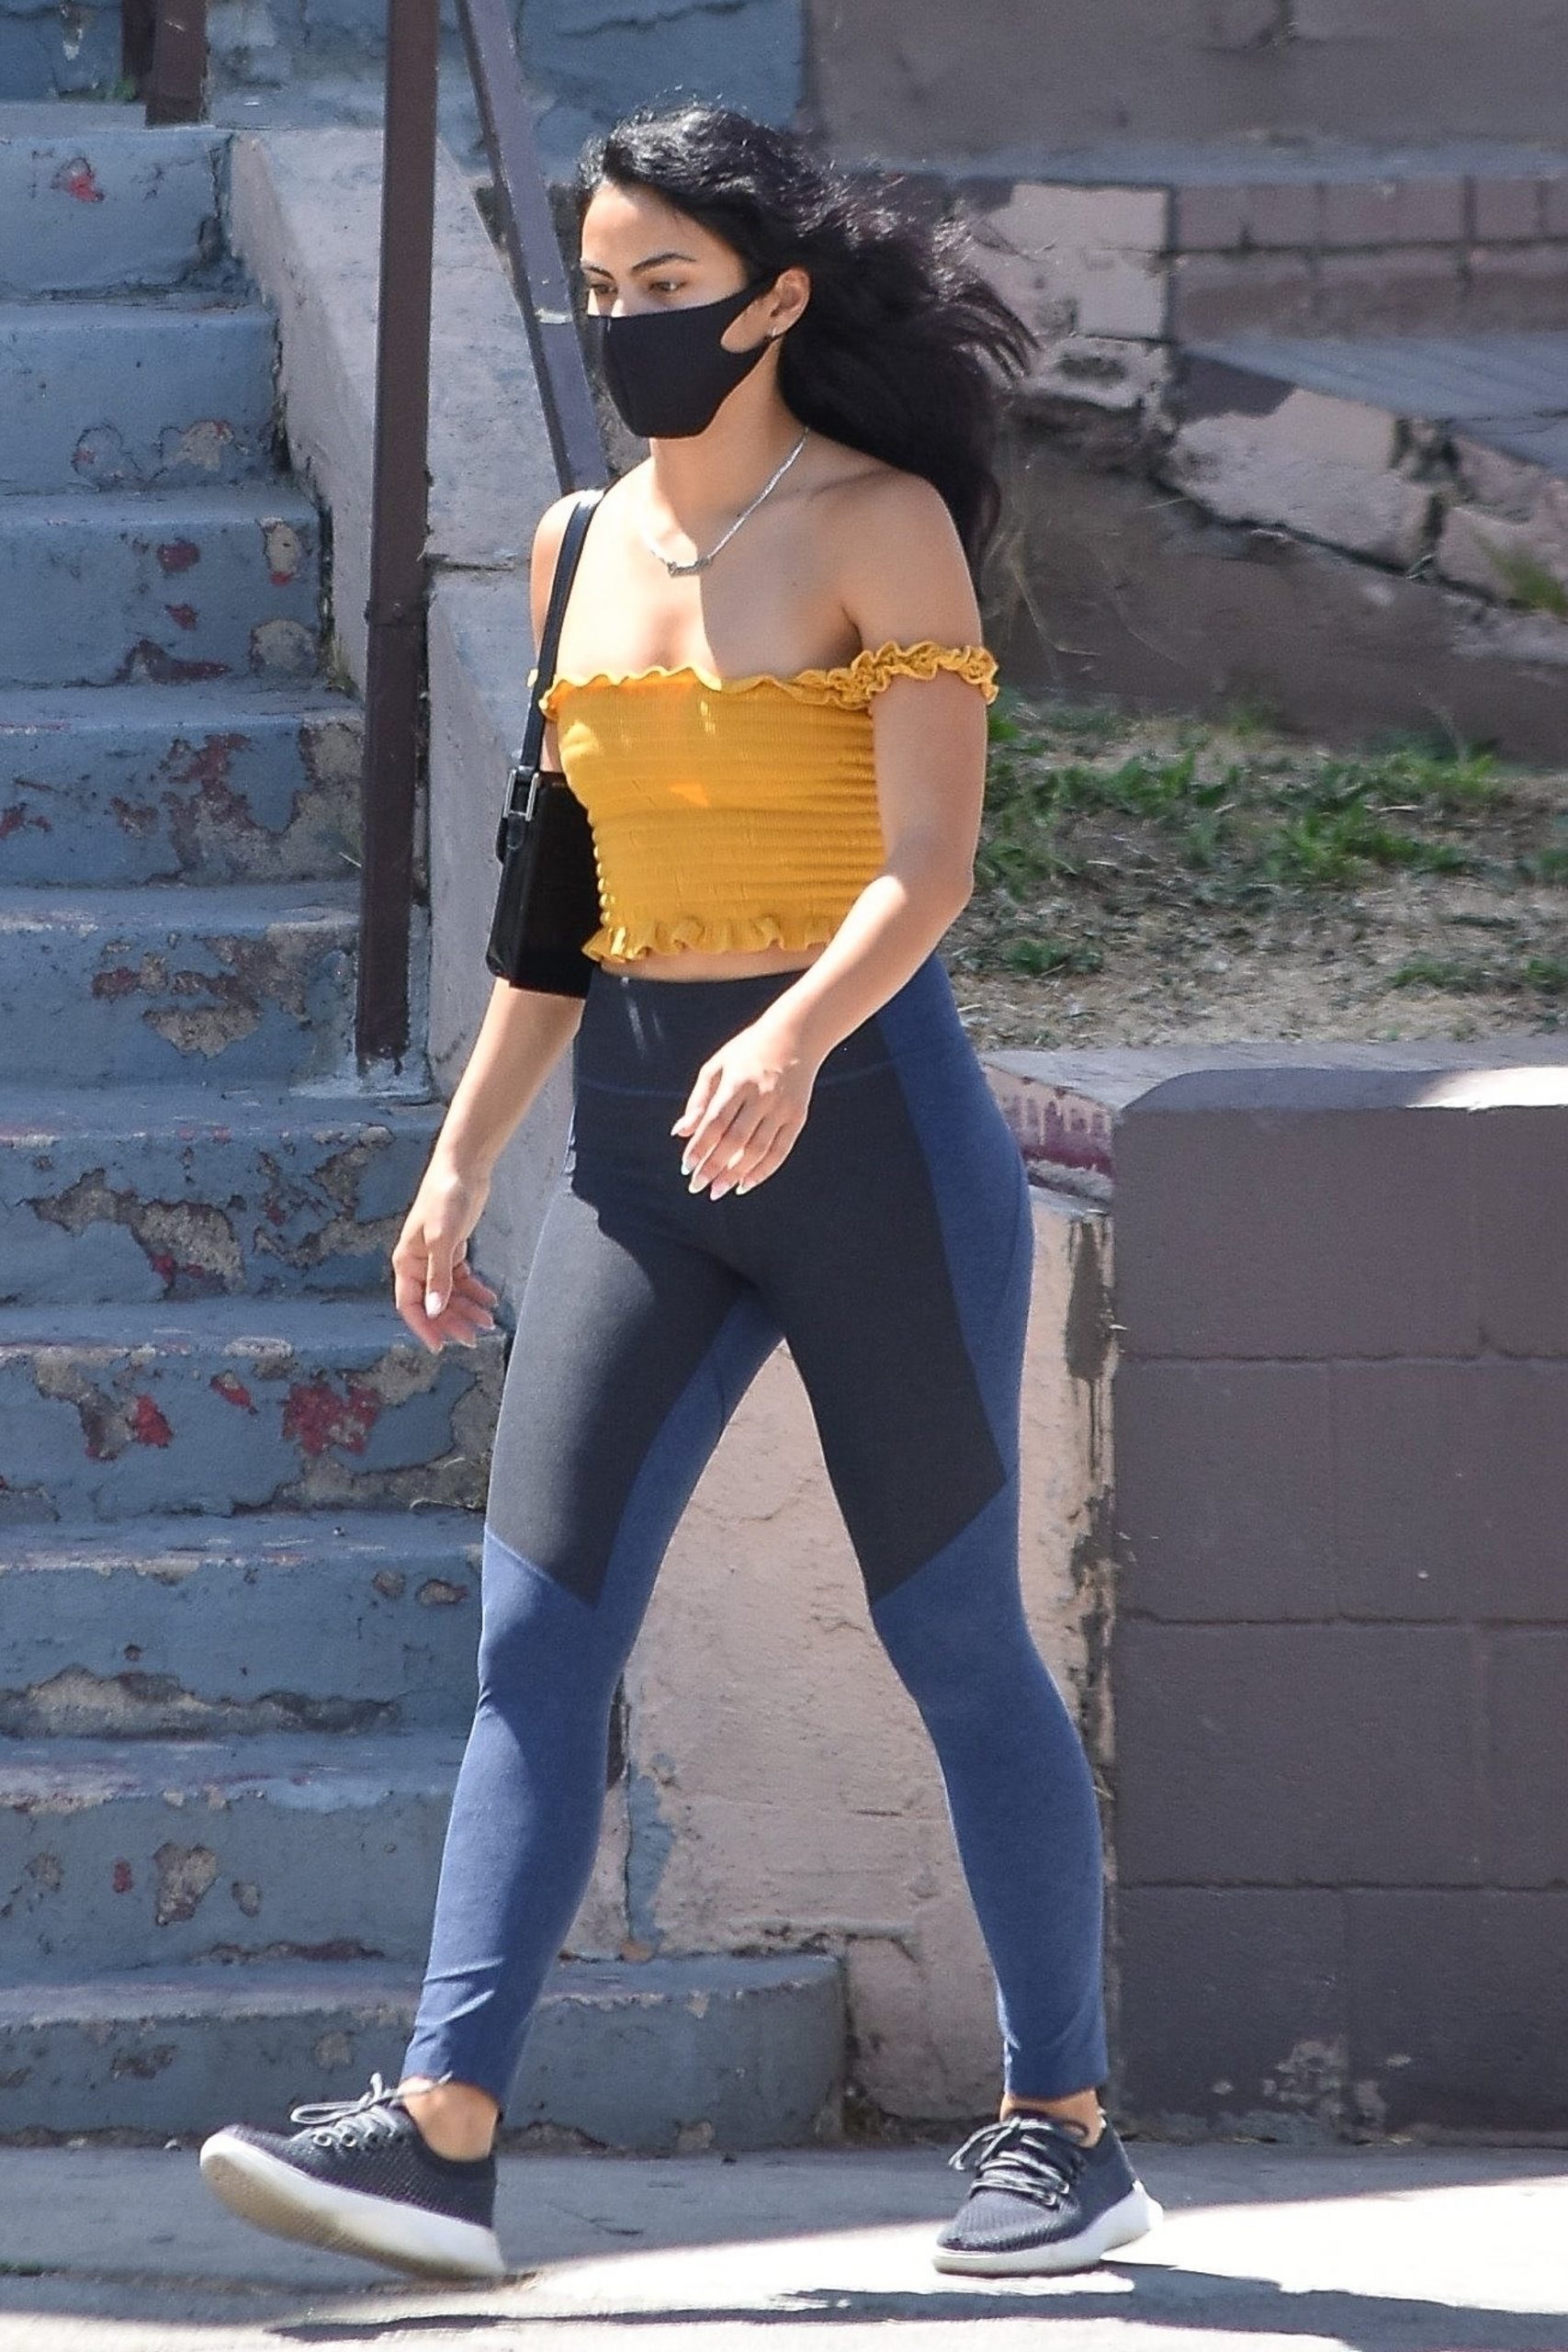 Camila Mendes’ In Off-Shoulder Top Mustard Yellow  Top – August 15, 2020